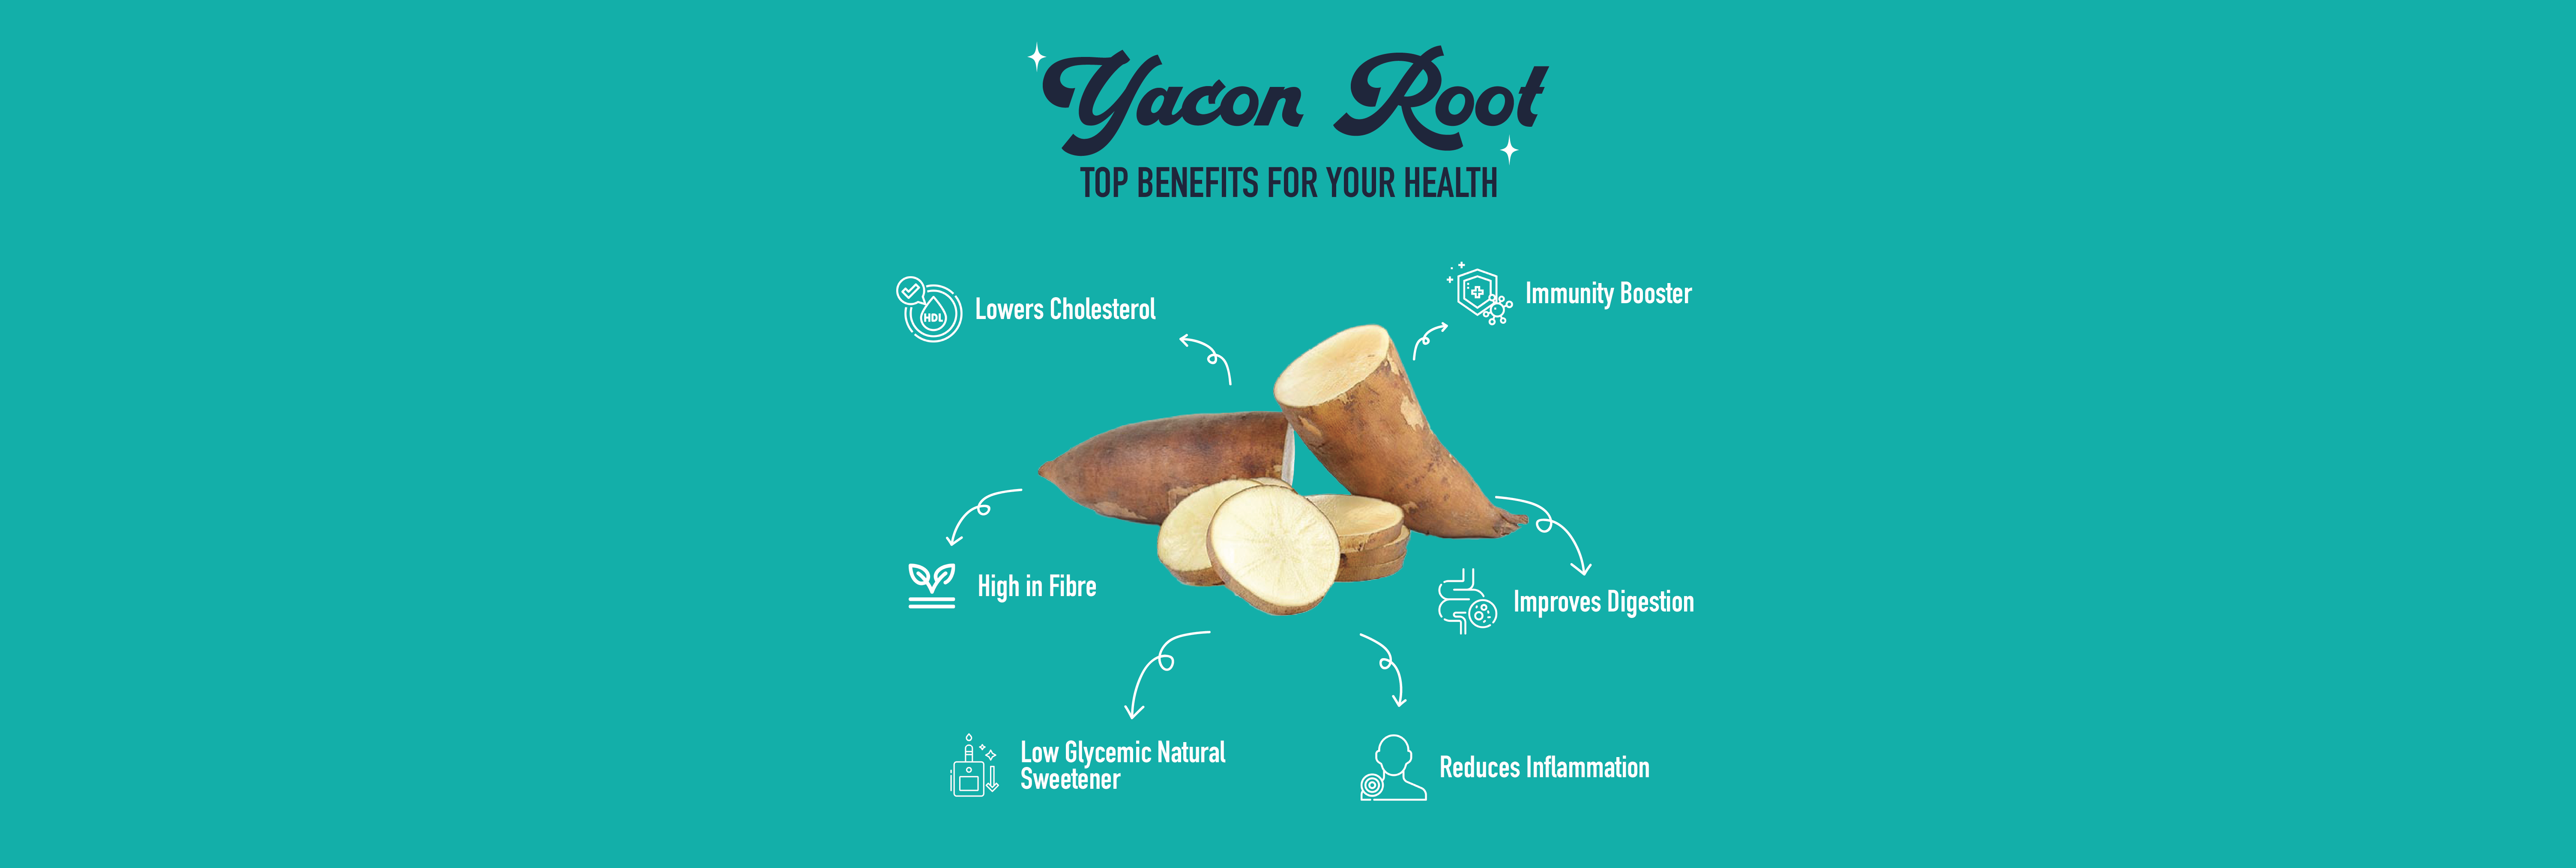 Why YACON ROOT is the latest trend in health foods - Crazy D's